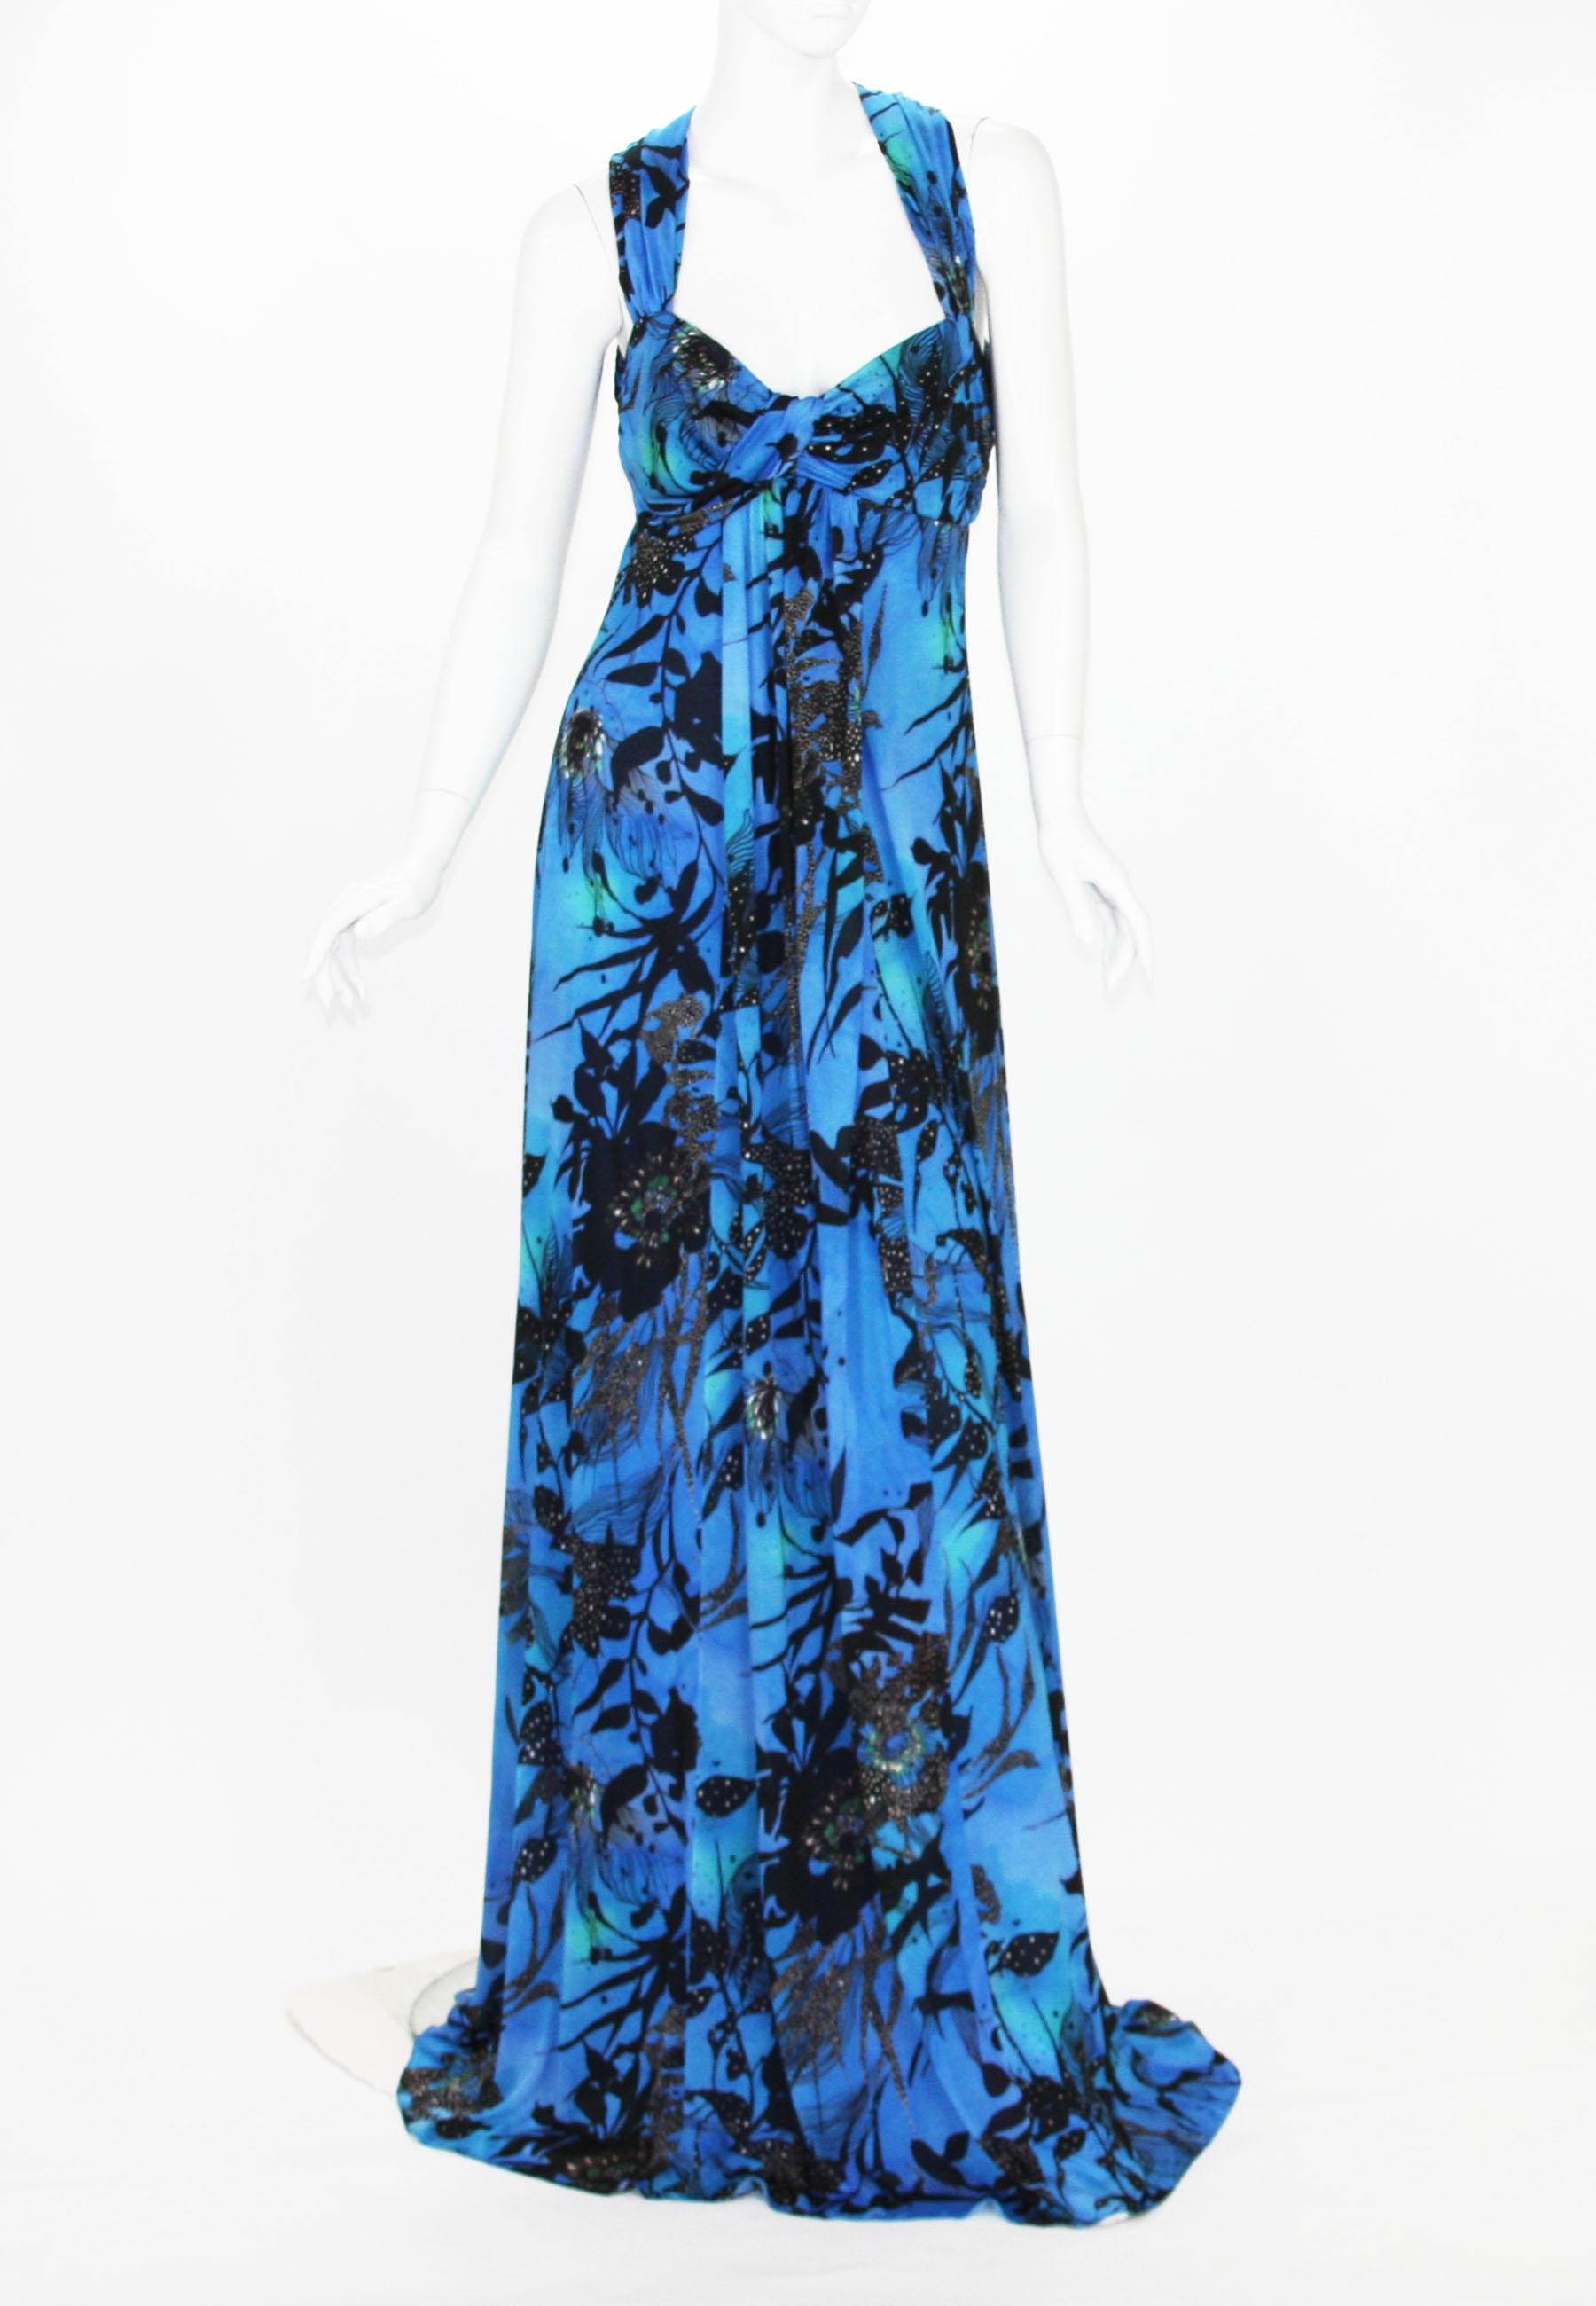 New ETRO Jersey Floral Print Long Dress
Italian Size 44 – US 8/10
Colors – Blue, Black.
Baby Doll Style, Slip-on, Stretch Jersey Fabric, Fully Lined, No Zipper.
Measurements approx. : Length - 66 inches, Under the bust - 32 inches + stretch.
Made in